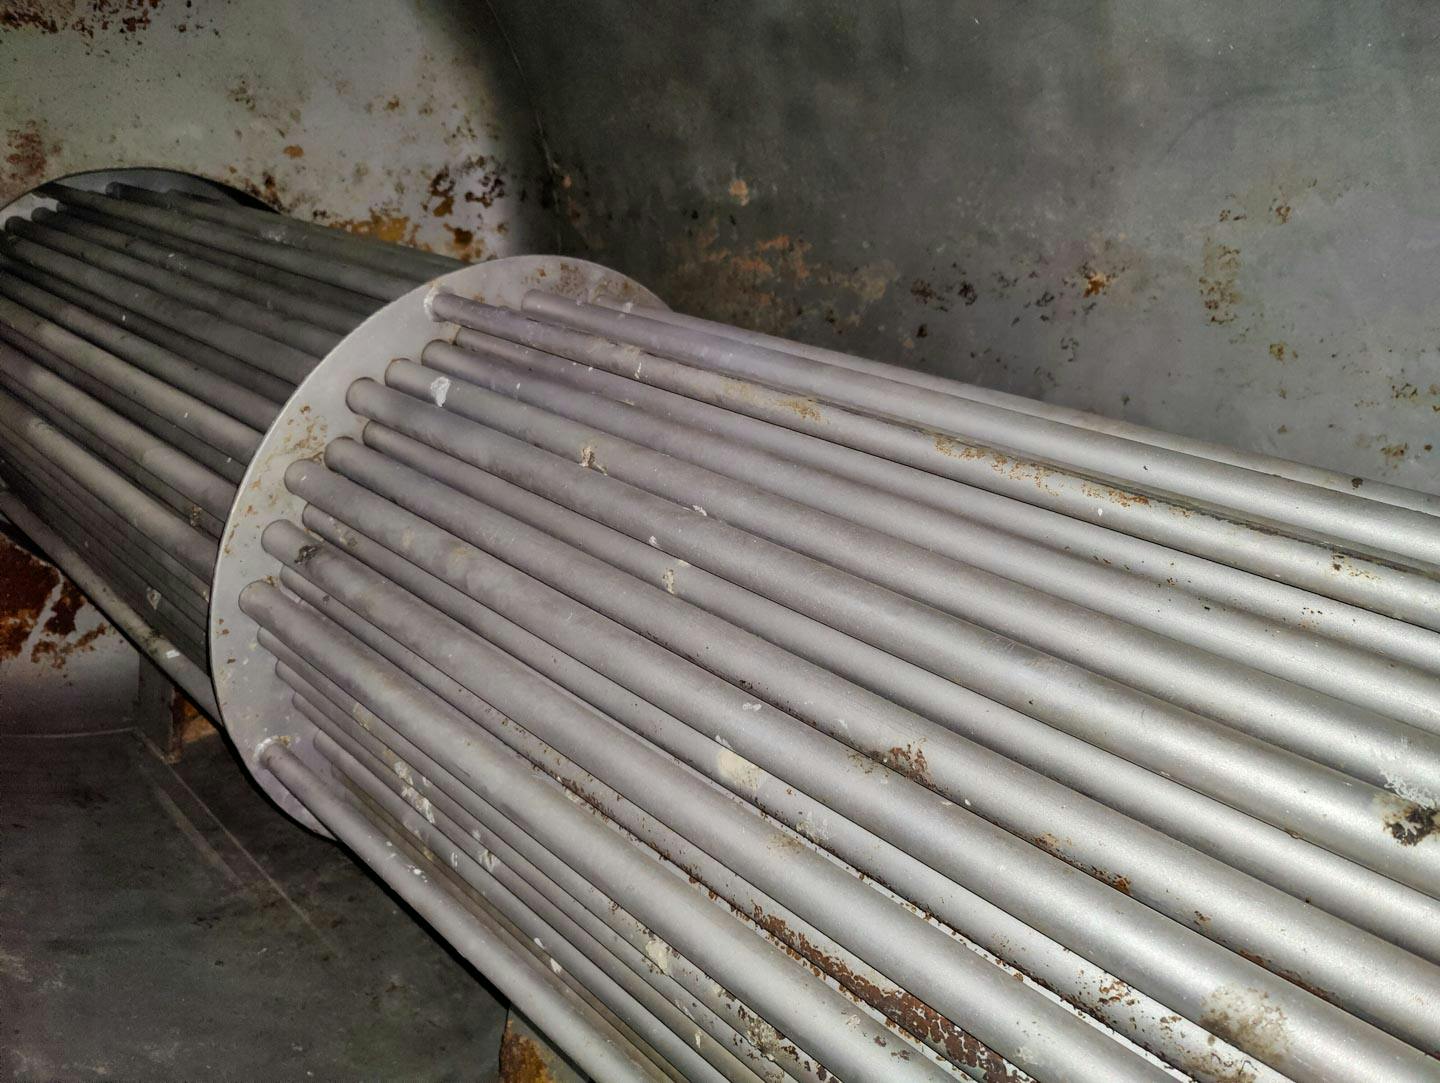 Shell and tube heat exchanger - image 7